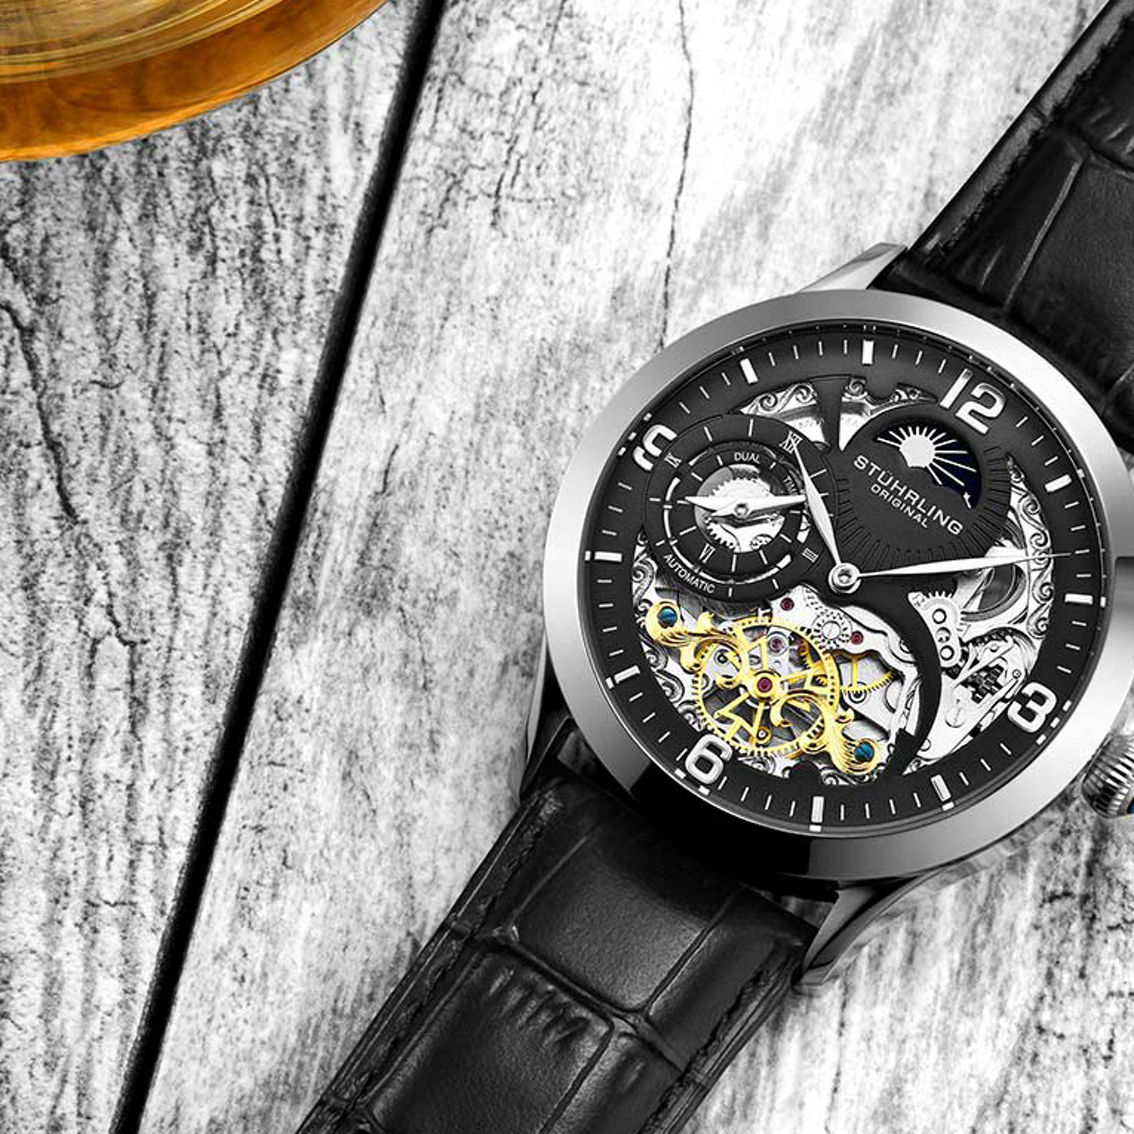 Stührling Original Special Reserve 3921 Dual Time Automatic 44mm Skeleton Watch - Image 5 of 5